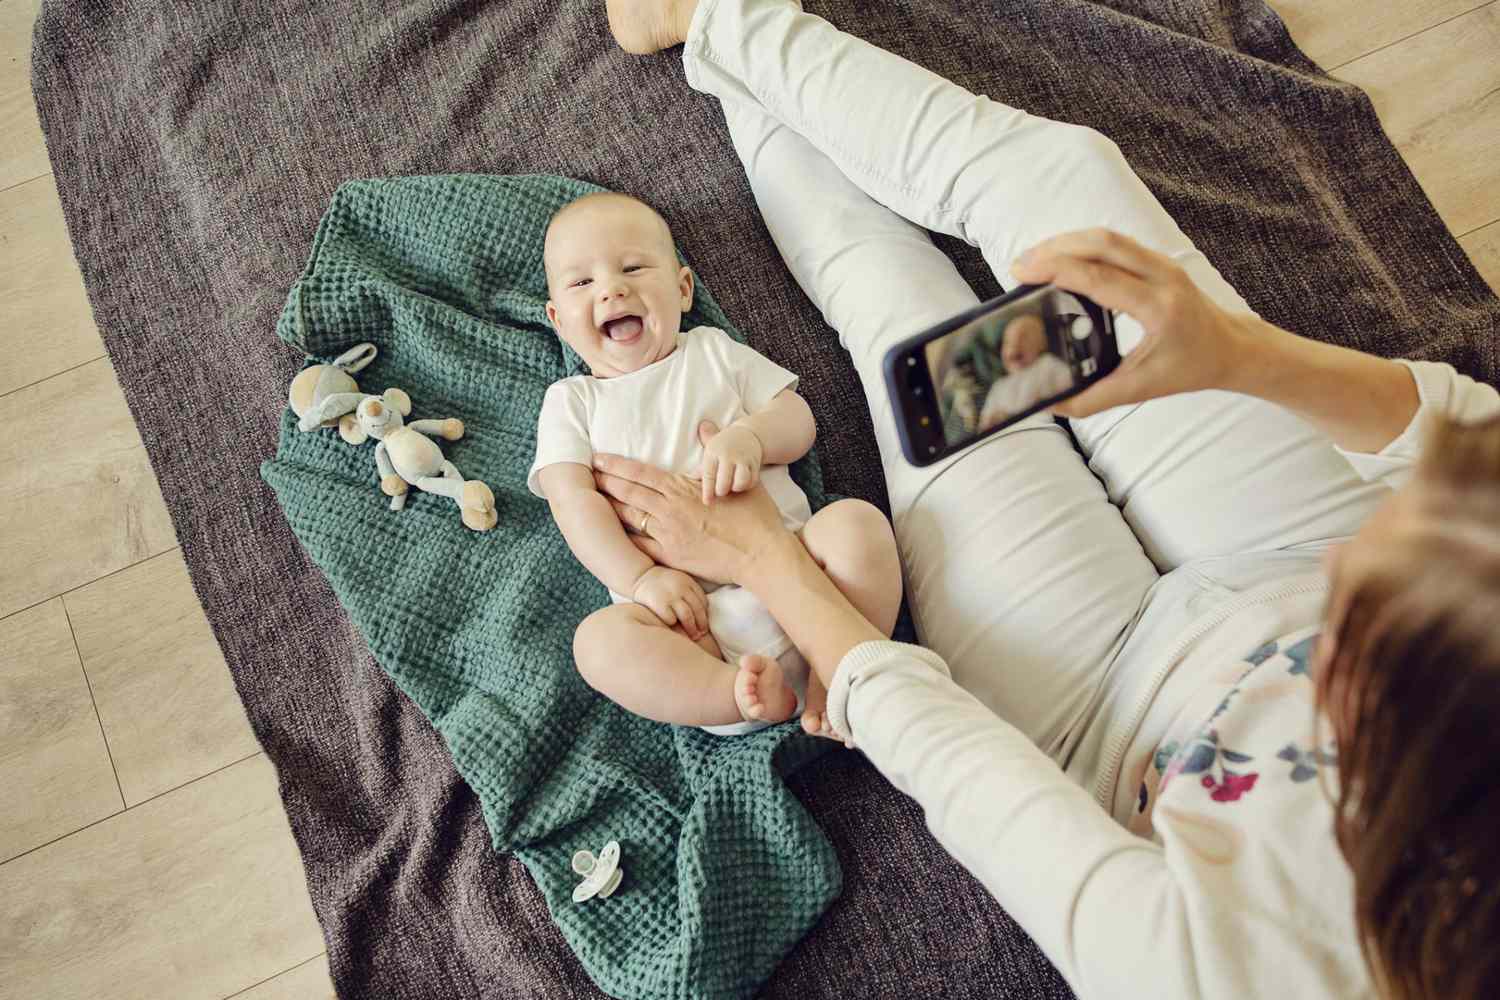 An image of a mom taking a picture of her baby.